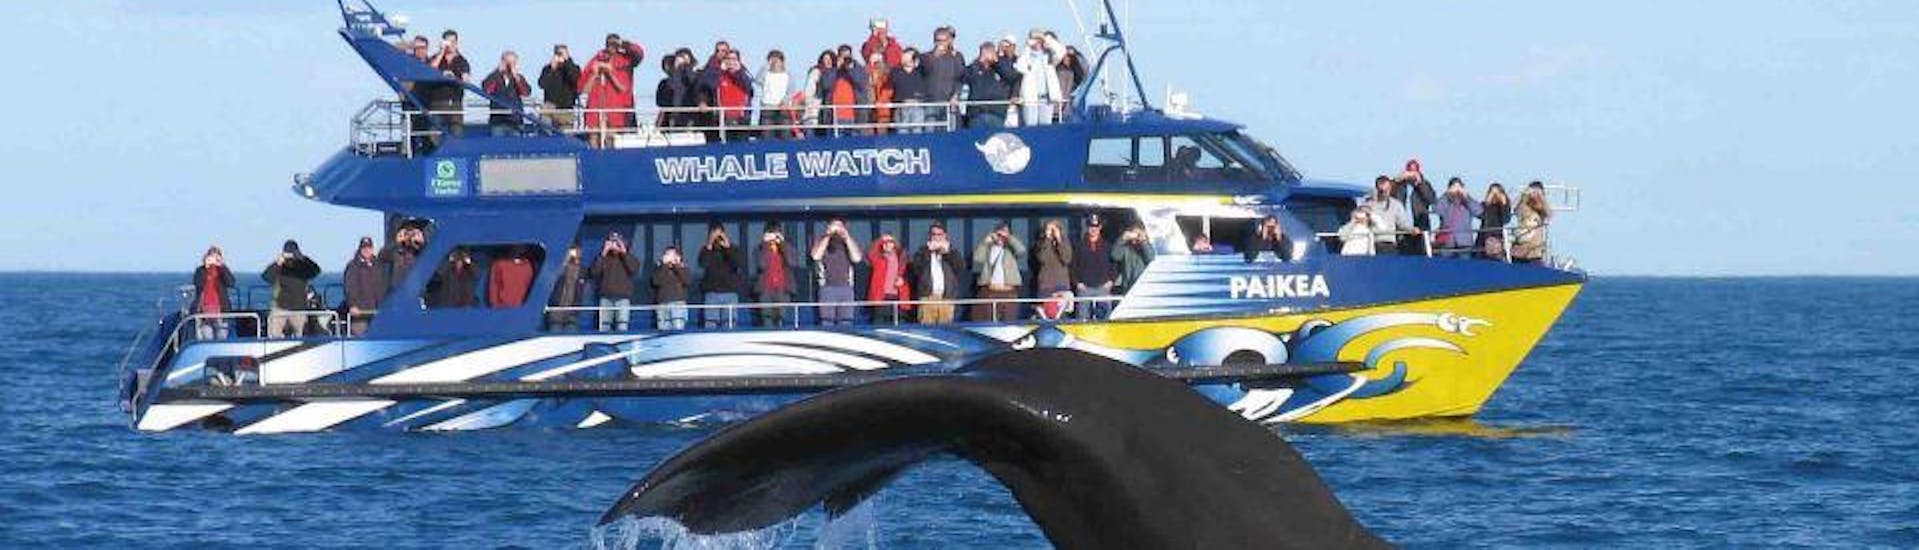 Bootstour - Gansbaai mit Wildtierbeobachtung mit Shark Zone Cape Town - Hero image